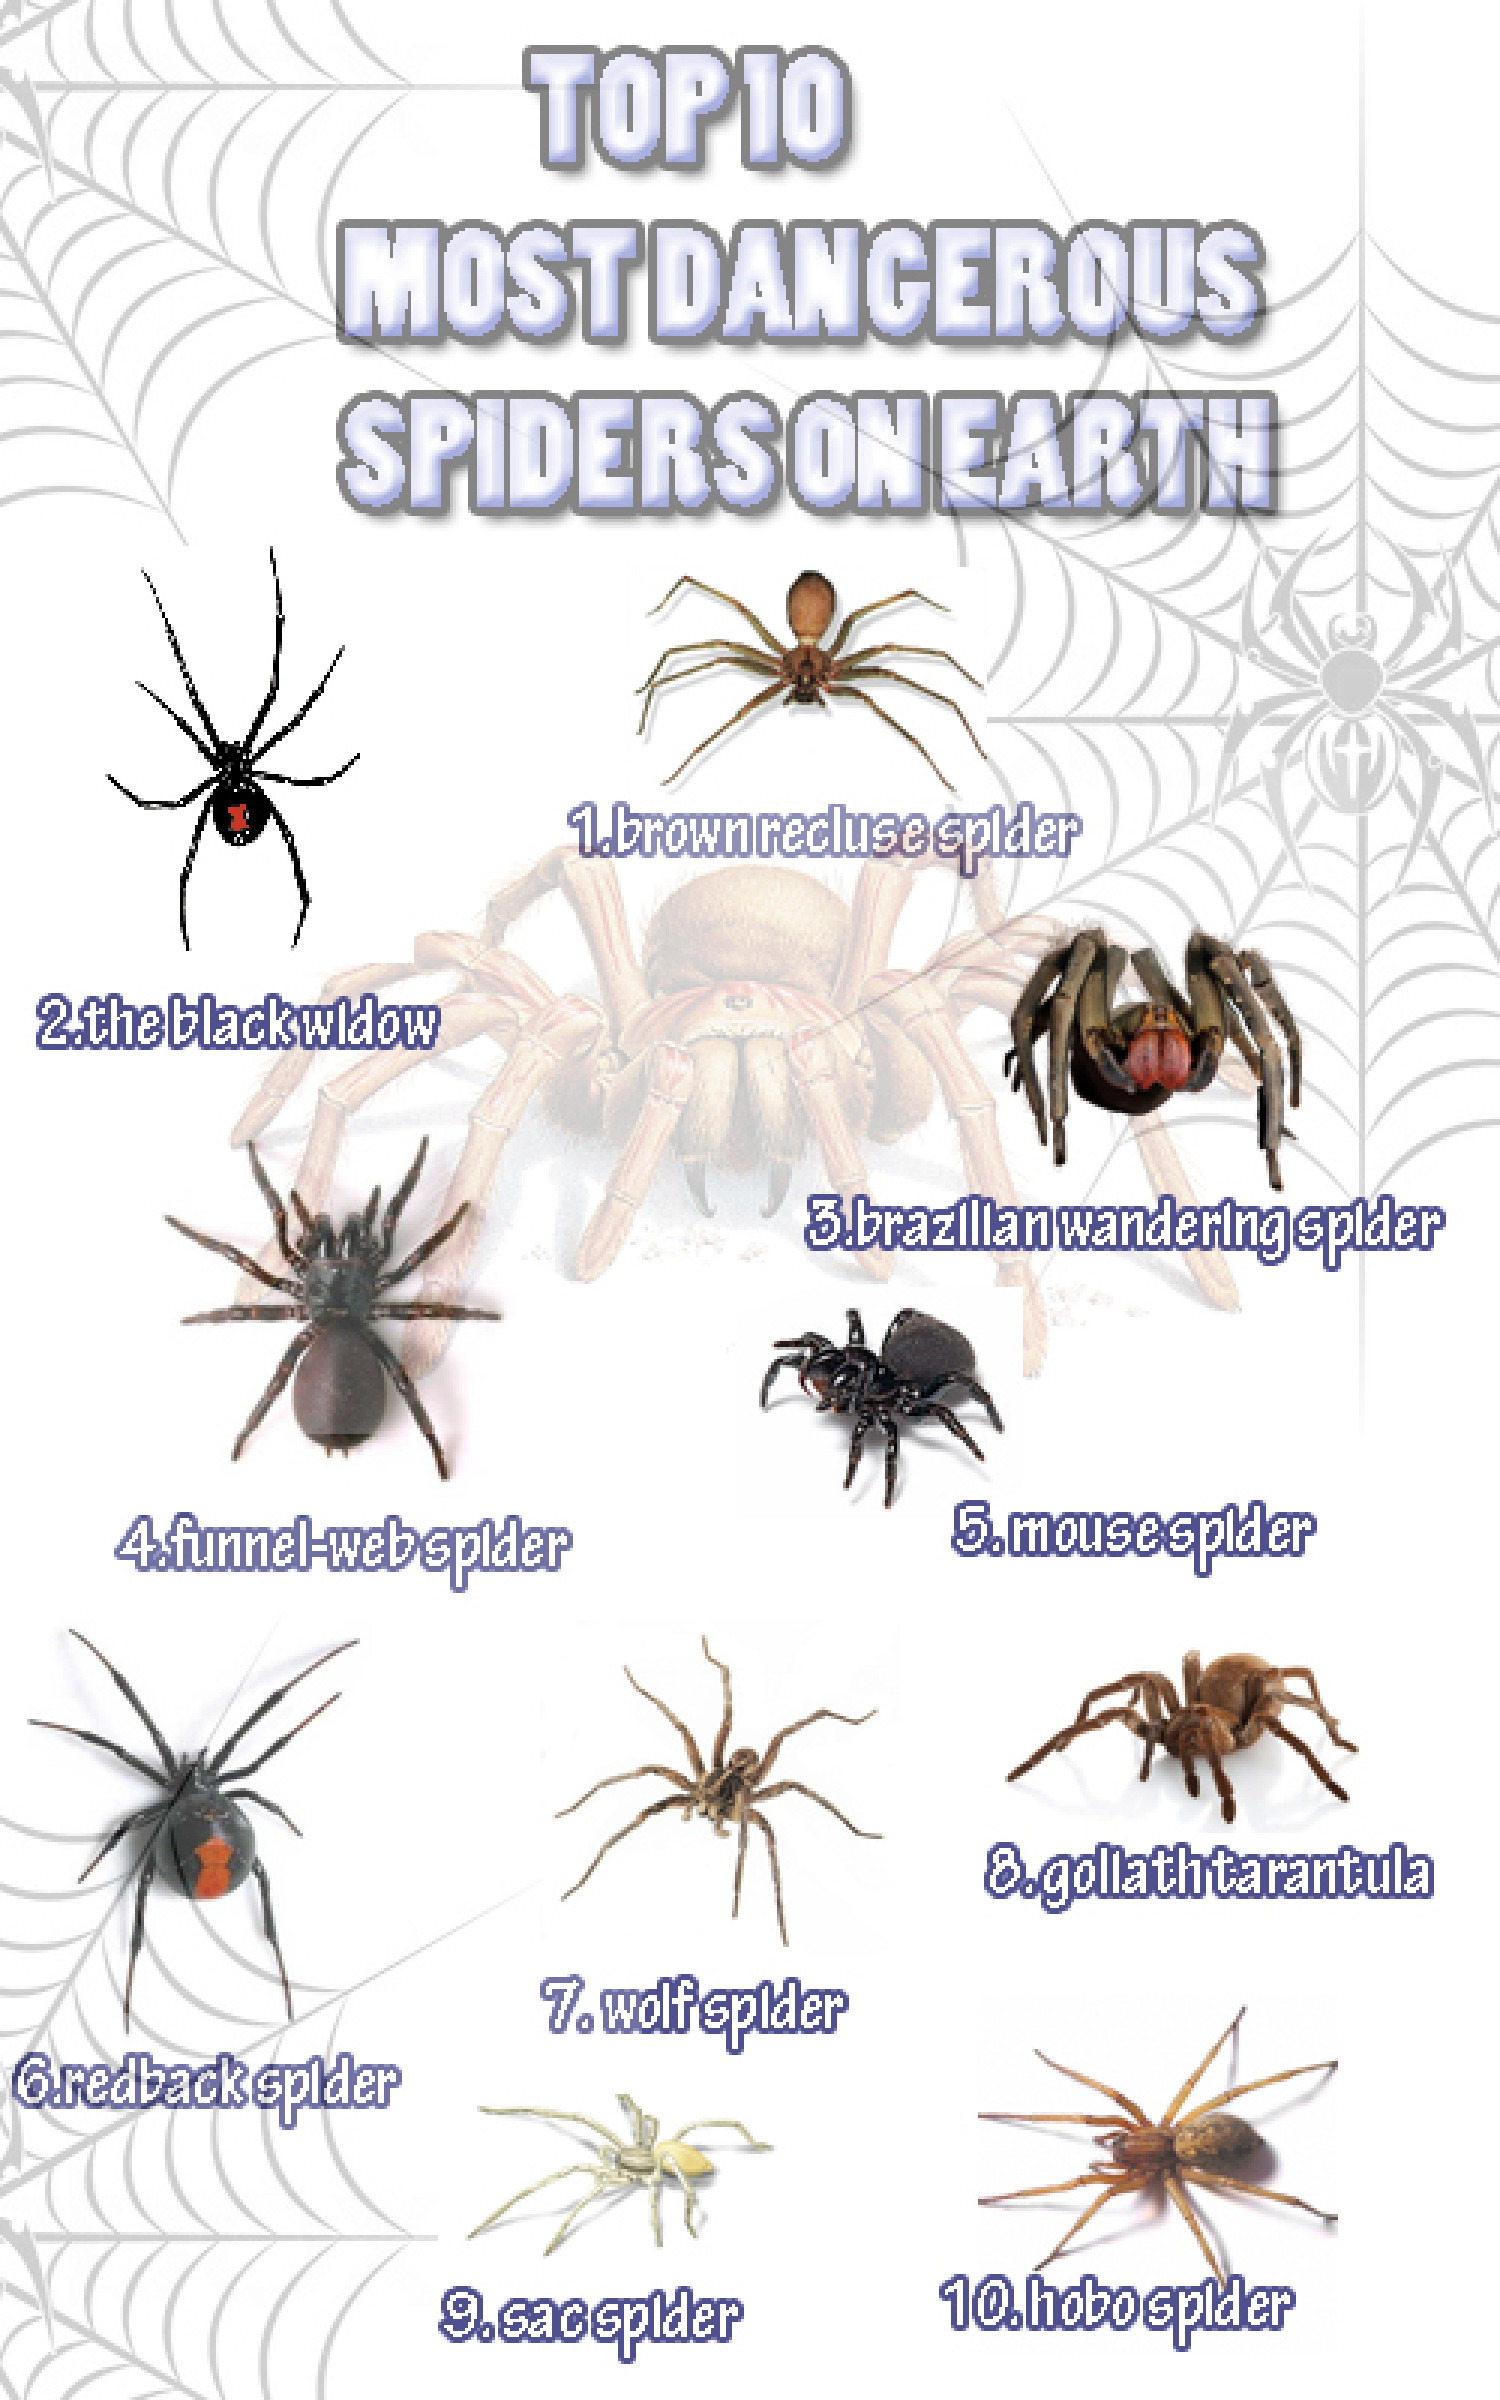 What are the 10 most dangerous spiders in the world?